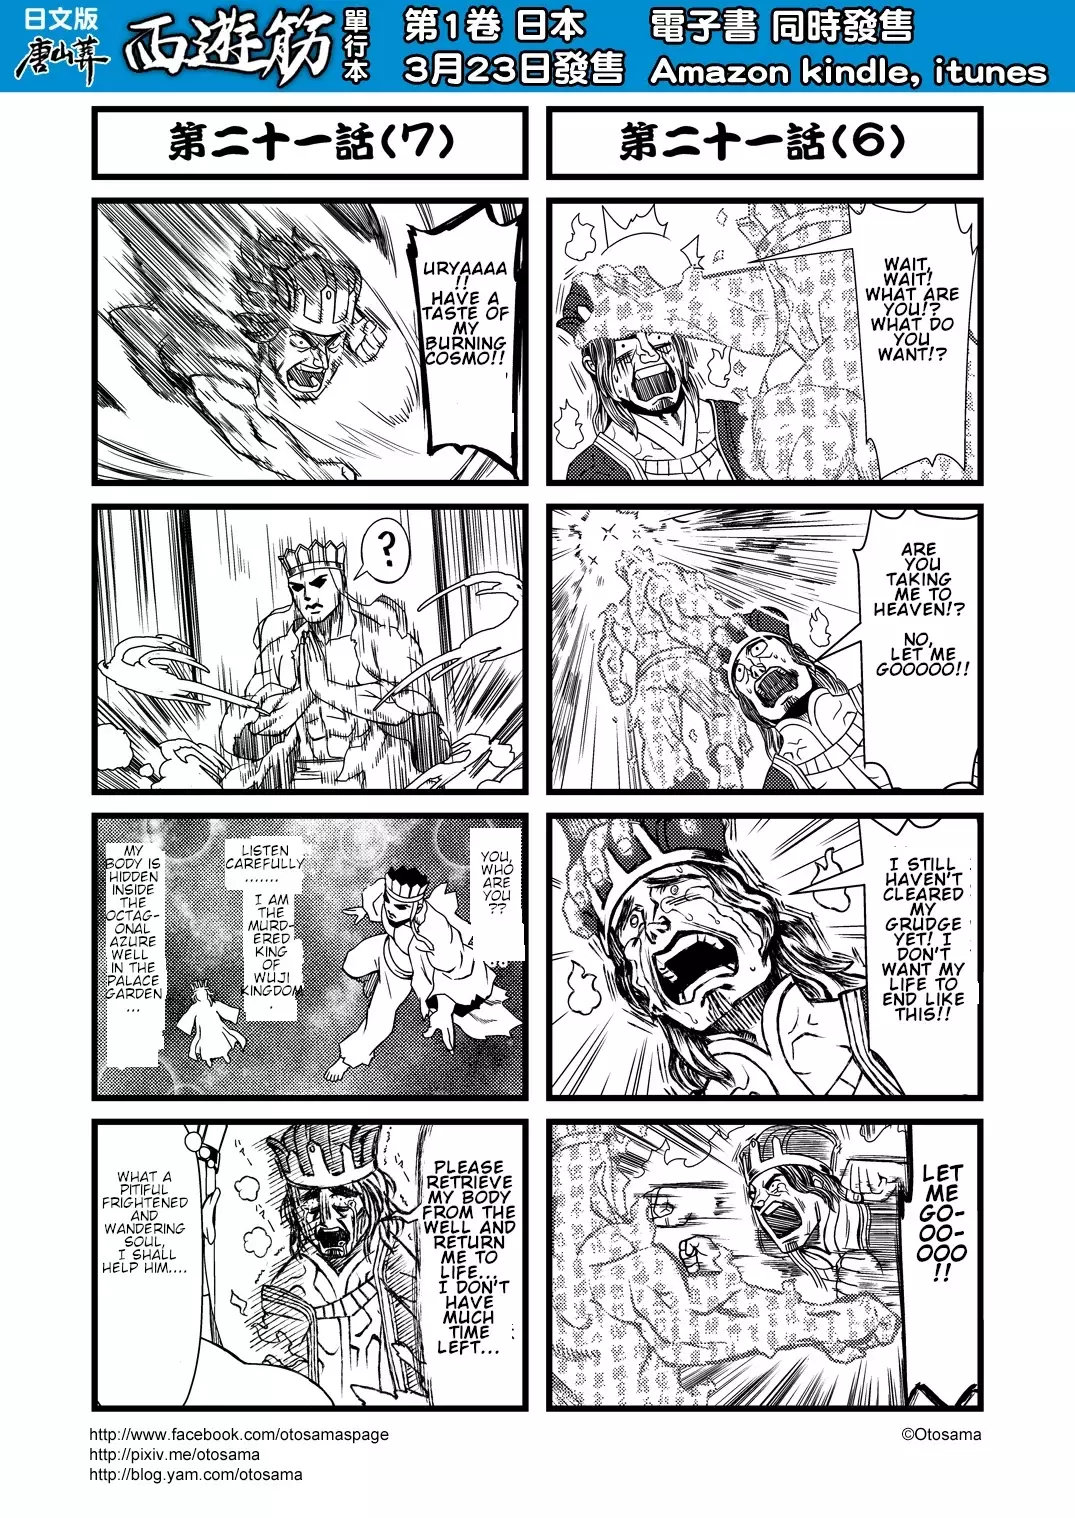 Tang Hill Burial - Journey To The West Irresponsible Anything Goes Edition - 21 page 4-ea6a4a21